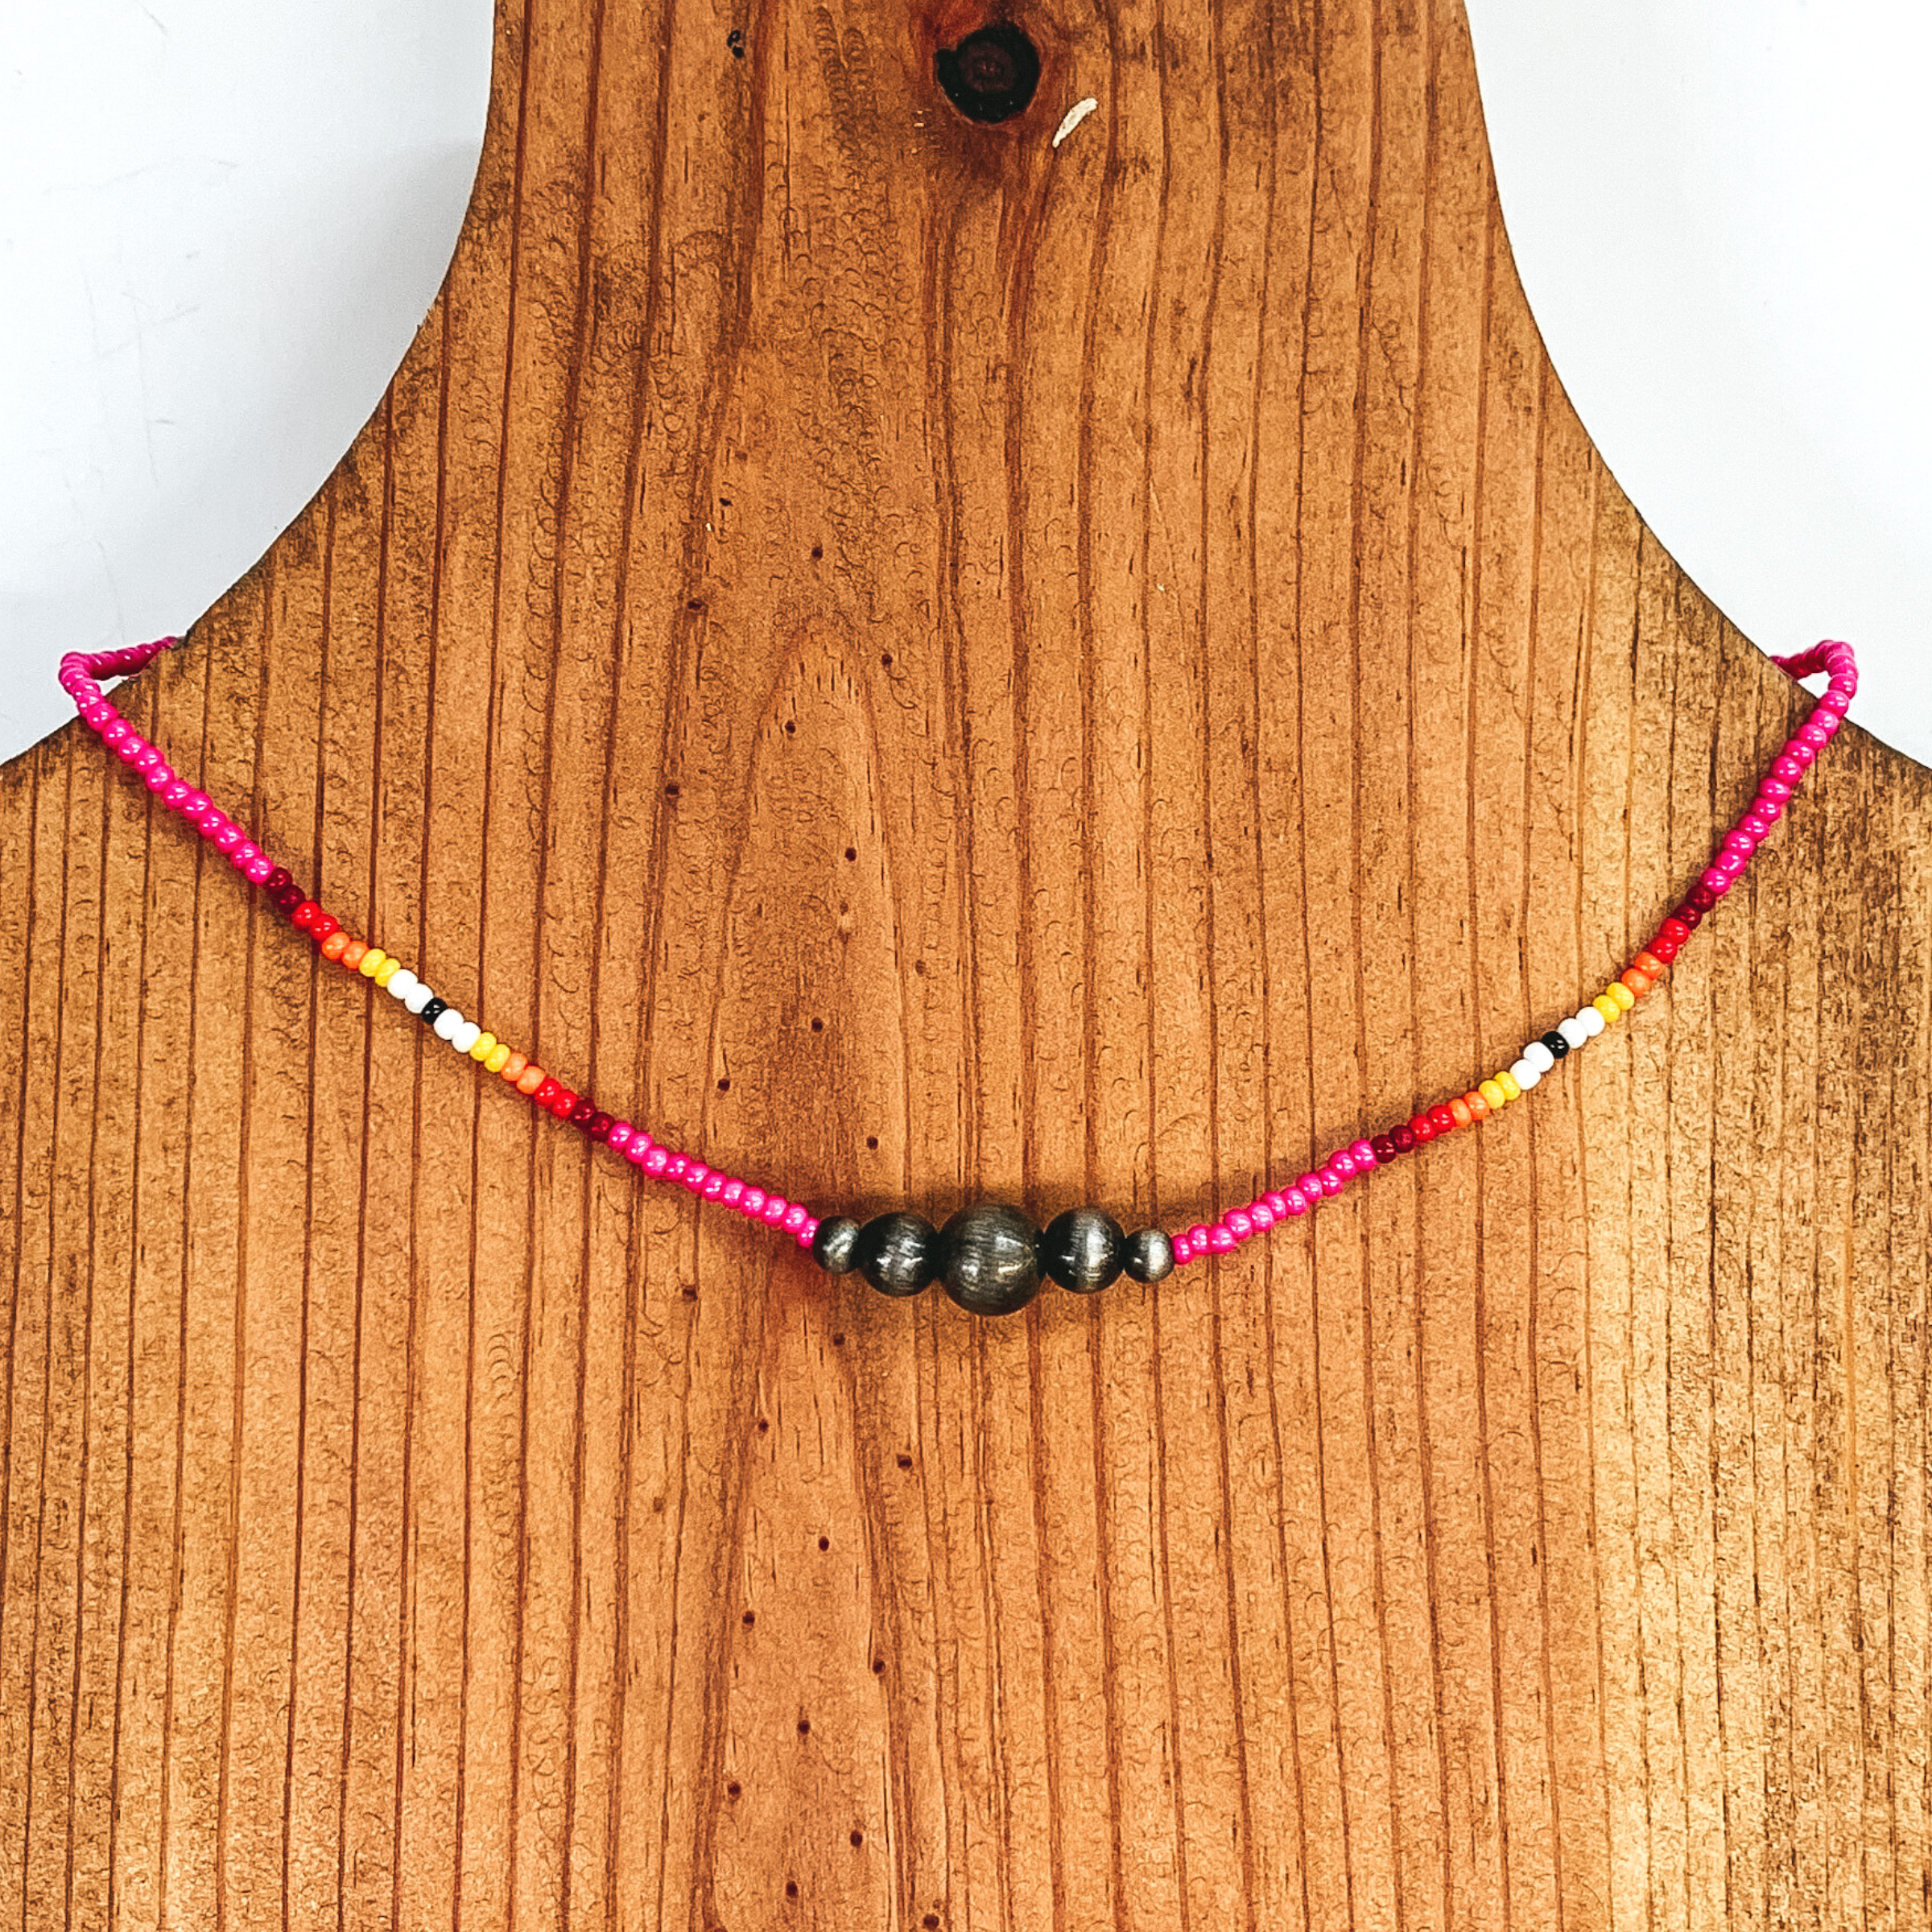 Pink beaded necklace with center silver beads of varying sizes. On each side of the silver, center beads there is a segment the has black center bead with white, yellow, orange, red, and maroon beads folowing on each side. This necklace is pictured on a wooden necklace holder on a white background. 